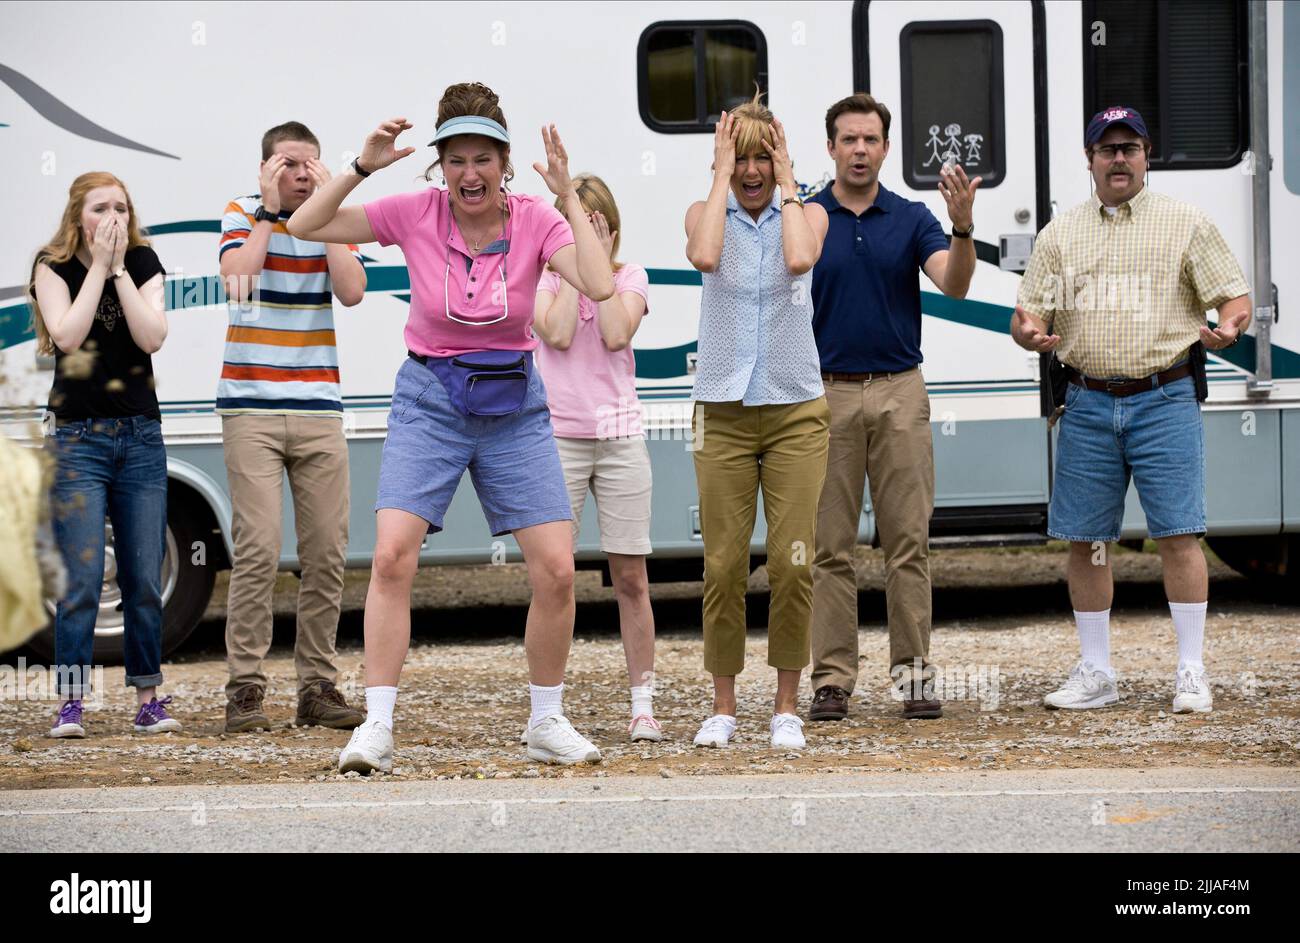 QUINN,POULTER,HAHN,ROBERTS,ANISTON,SUDEIKIS,OFFERMAN, WE'RE THE MILLERS, 2013 Stock Photo